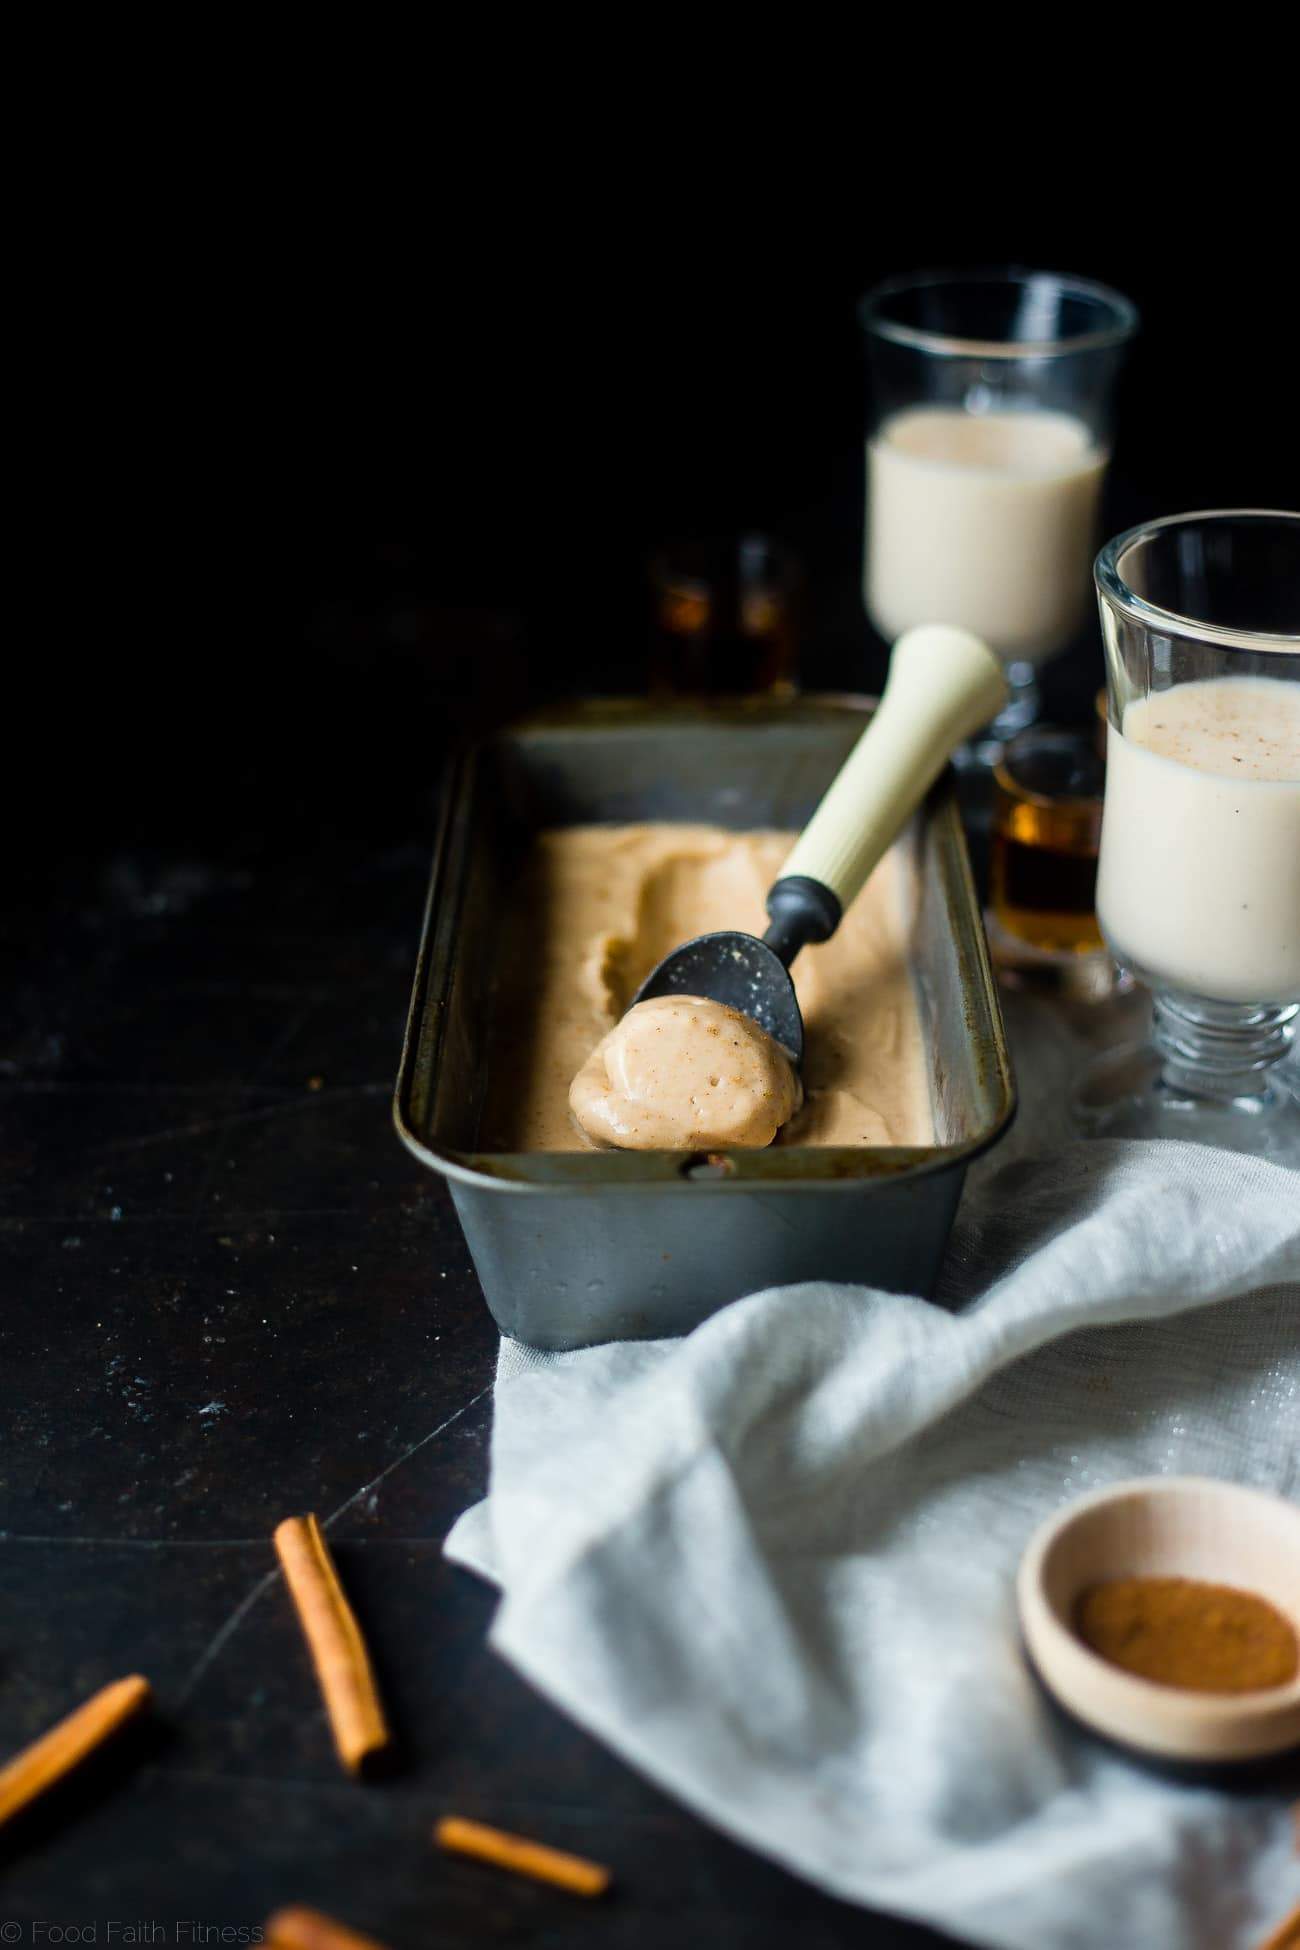 Vegan Rum and "Egg Nog" Ice Cream - This creamy, coconut milk ice cream tastes like frosty version of drinking a rum and eggnog...without the dairy or eggs! It's a healthy treat for the holidays! | Foodfaithfitness.com | @FoodFaithFit